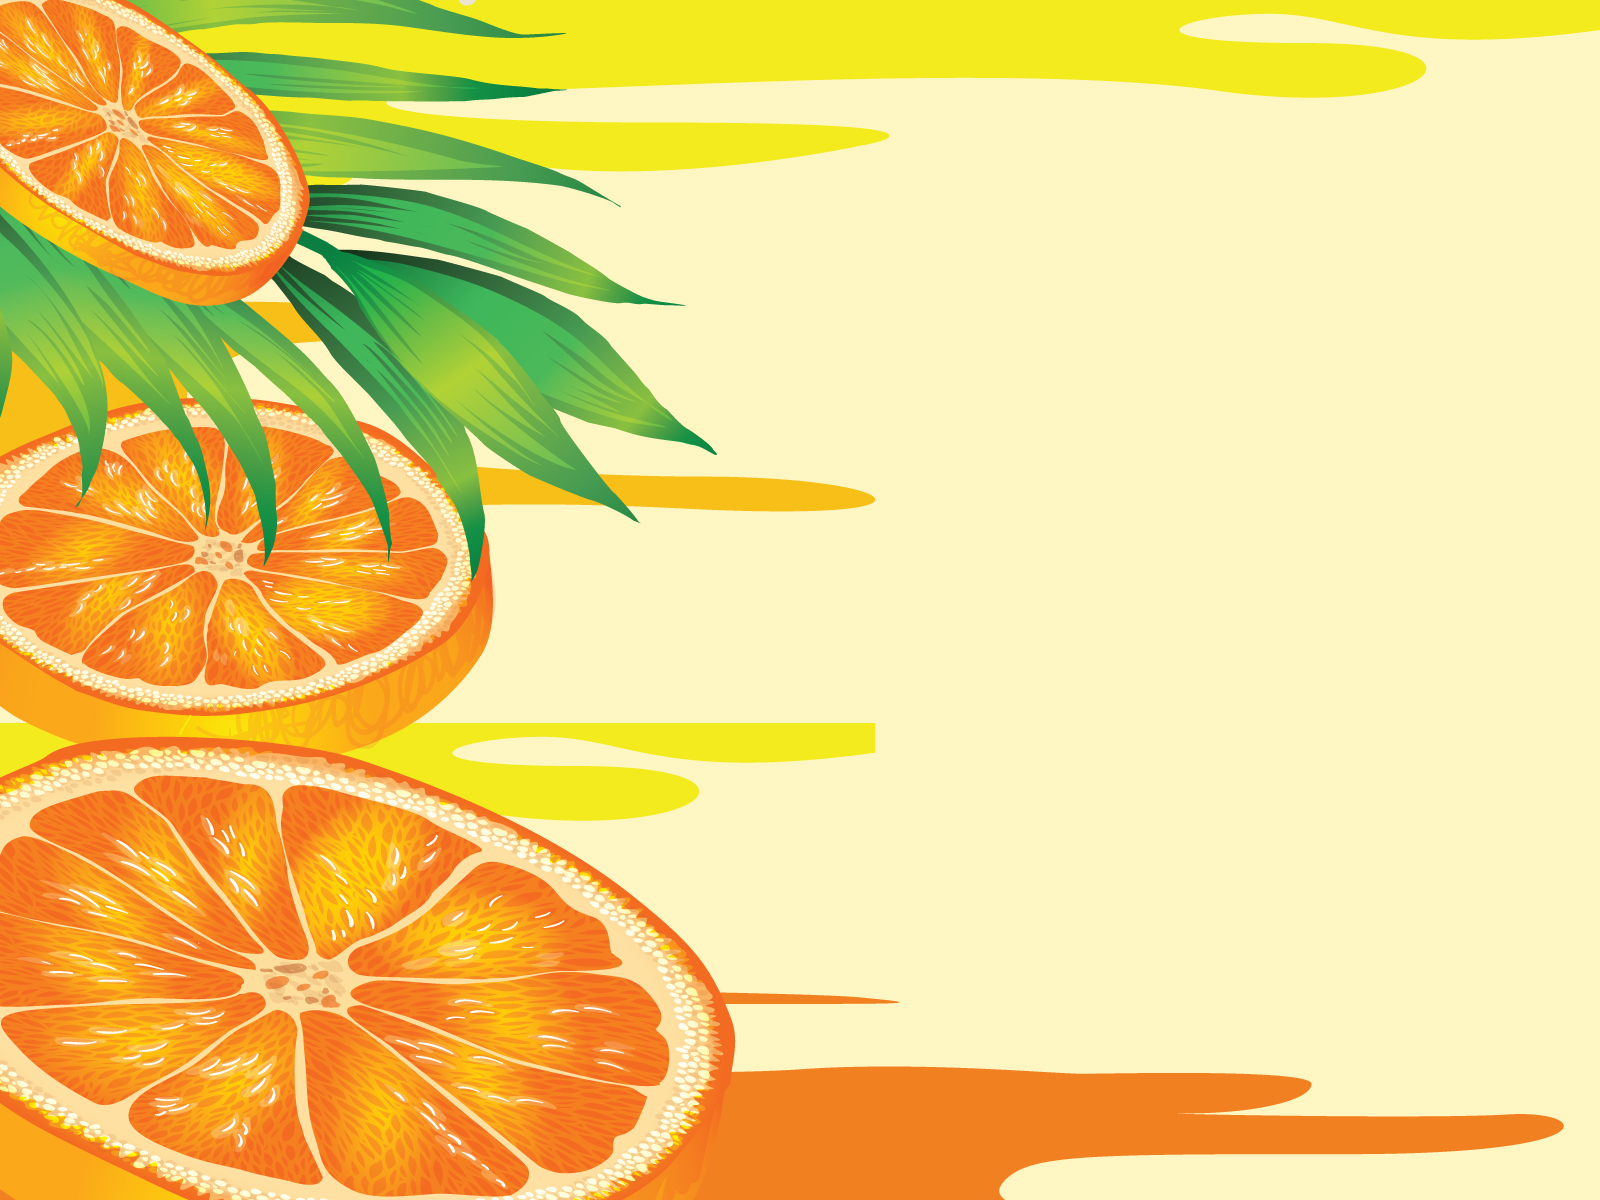 Orange Juice Template - Free PPT Backgrounds and Templates